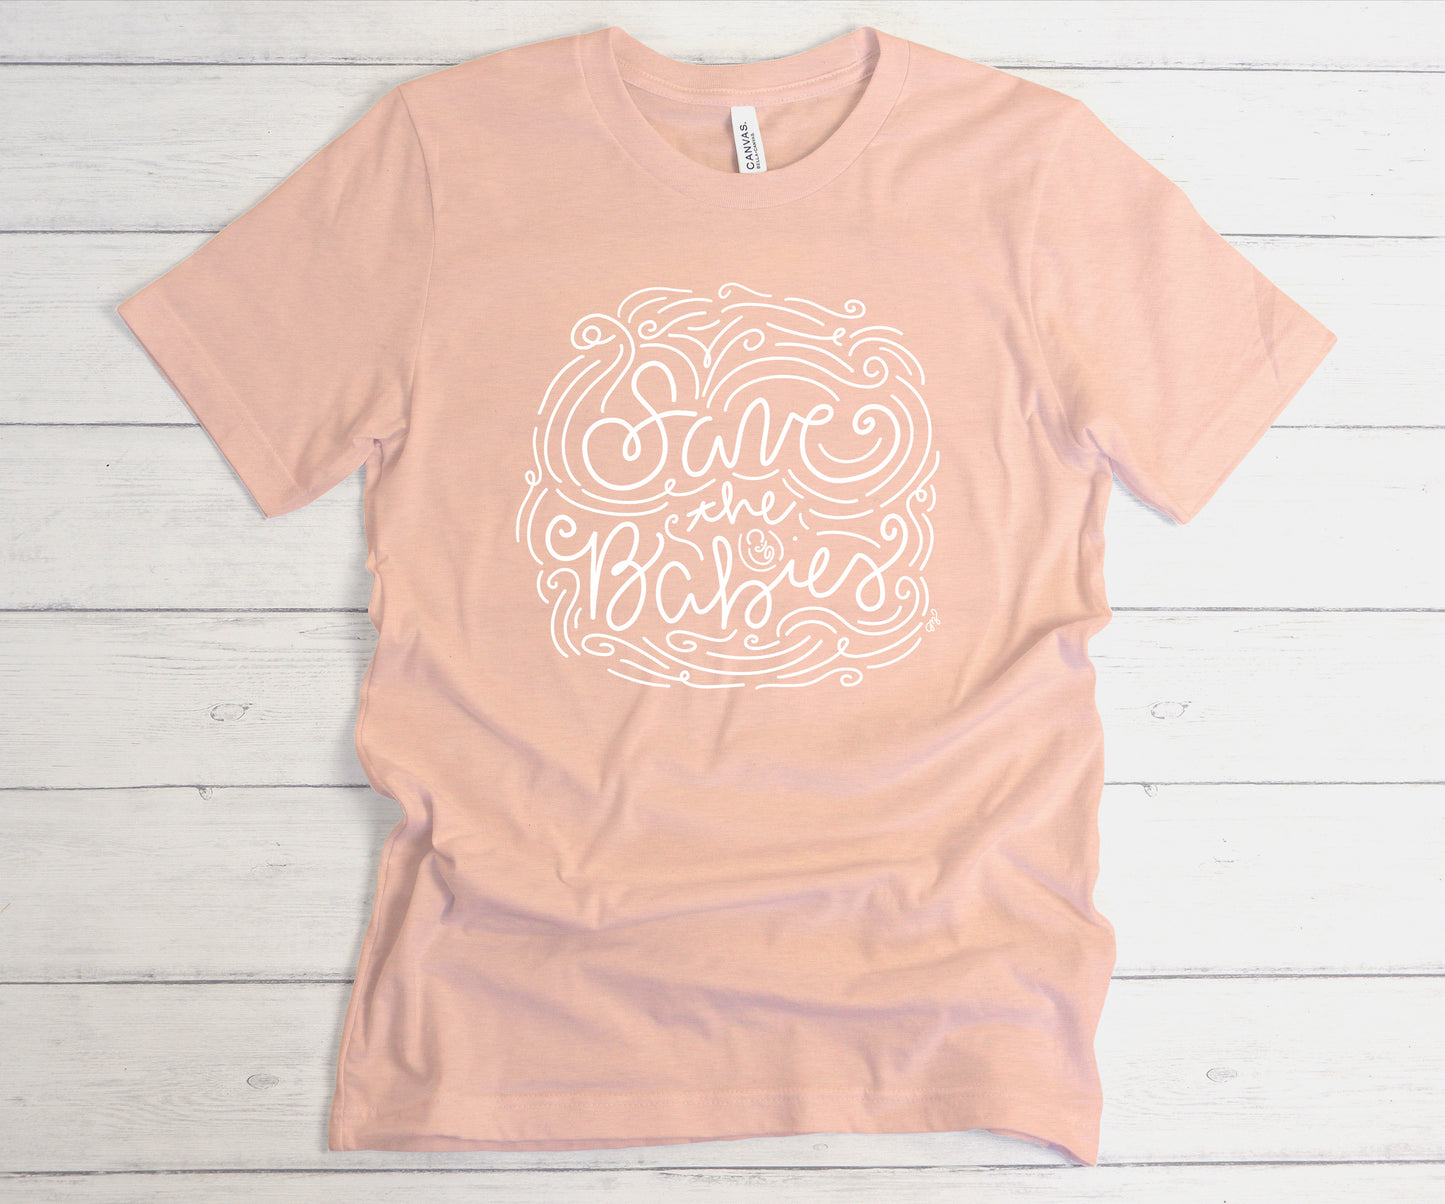 Save the Babies T-shirt | Donation to Piedmont Women's Center